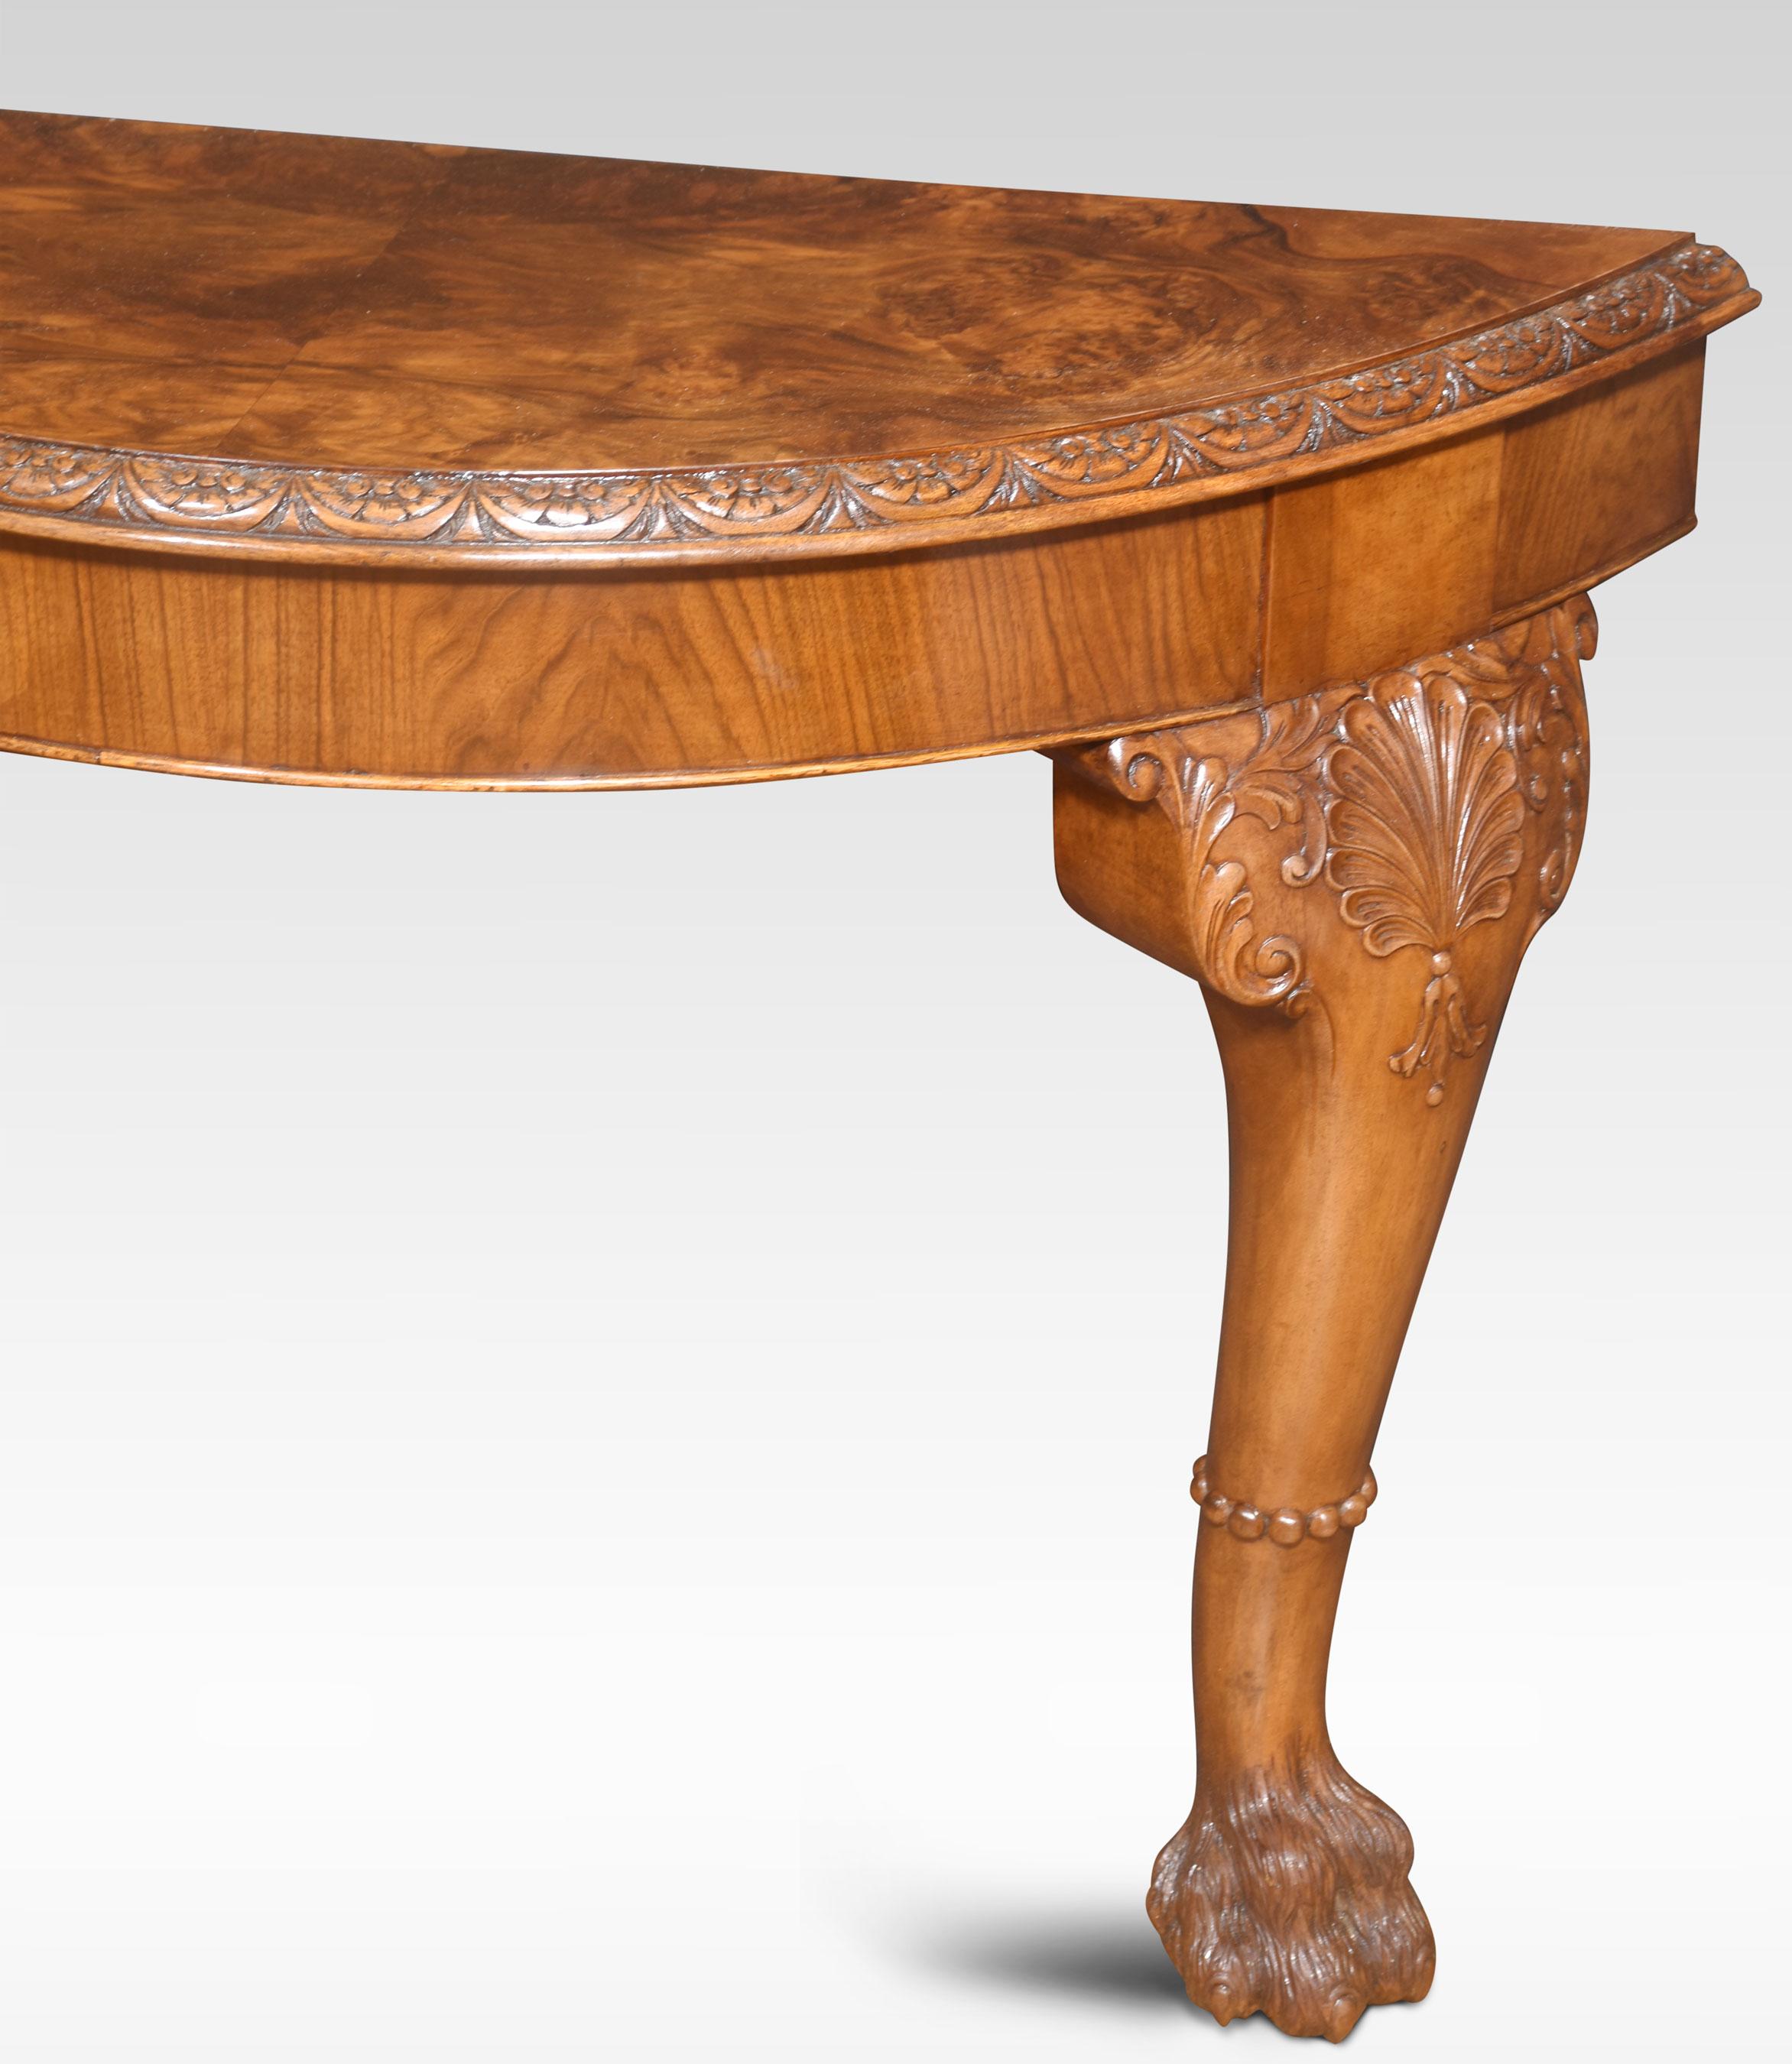 Pair of Console tables, the well-figured walnut tops having cared moulded edge, to the frieze raised up on two bold cabriole supports terminating in hairy paw feet. The tables can be secured by fixing directly into the wall.
Dimensions
Height 29